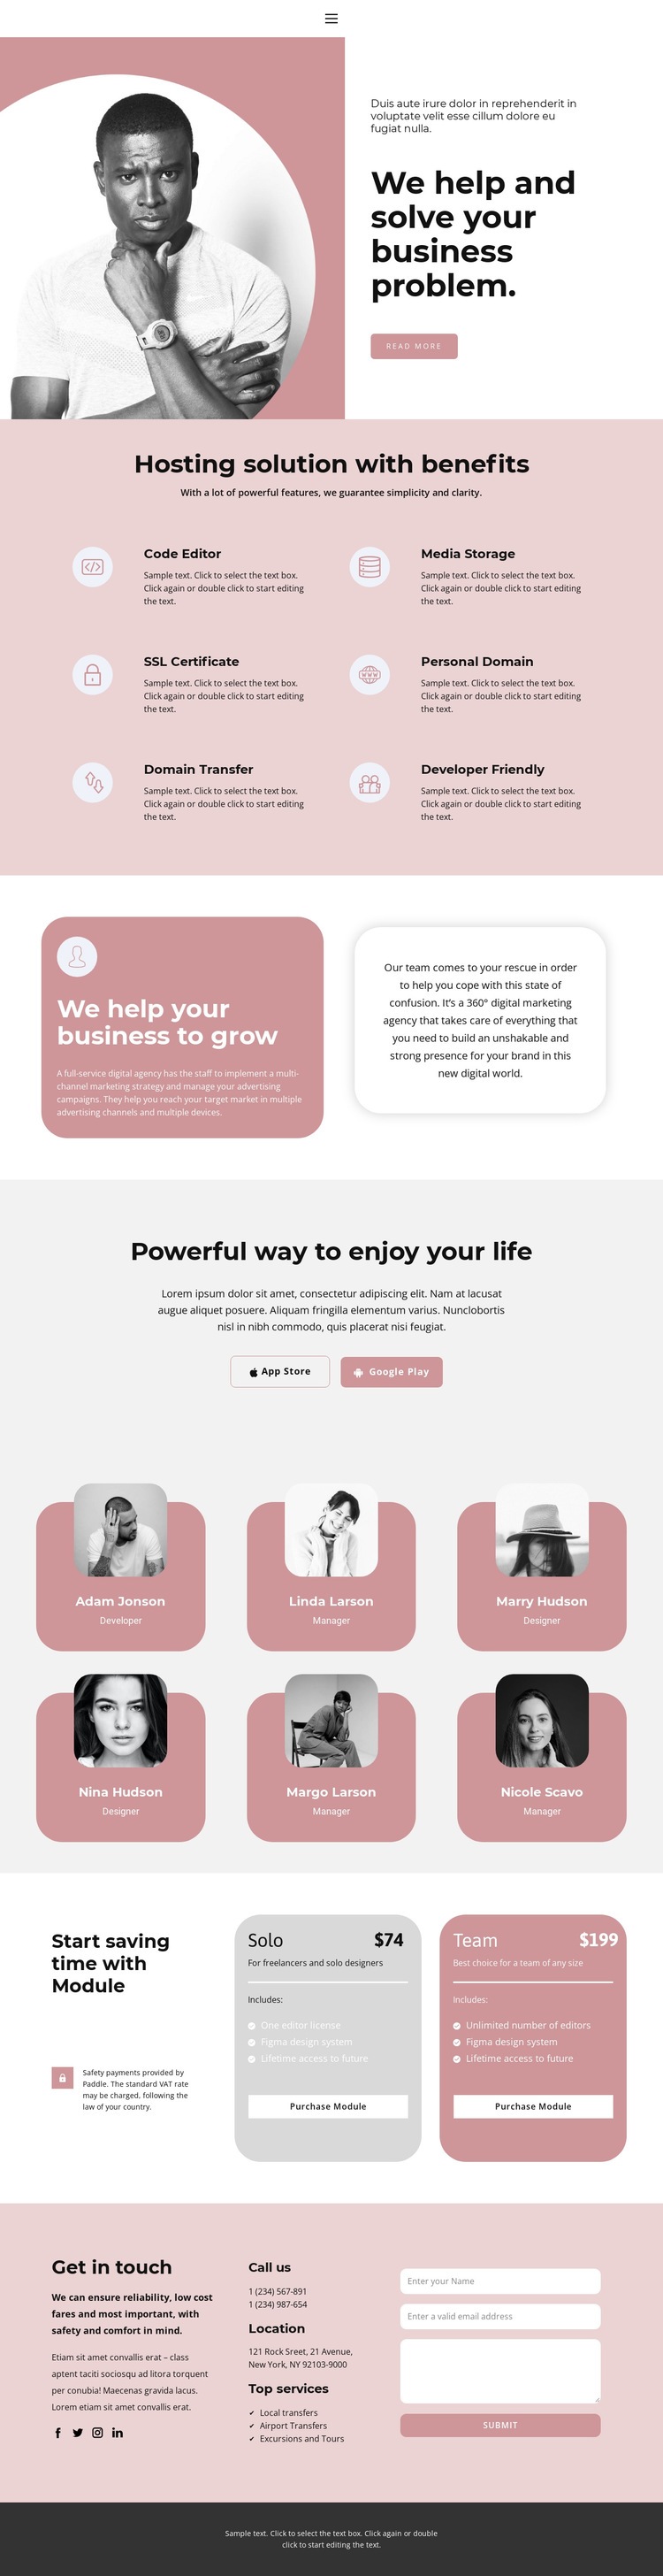 Problem solving is our choice Squarespace Template Alternative